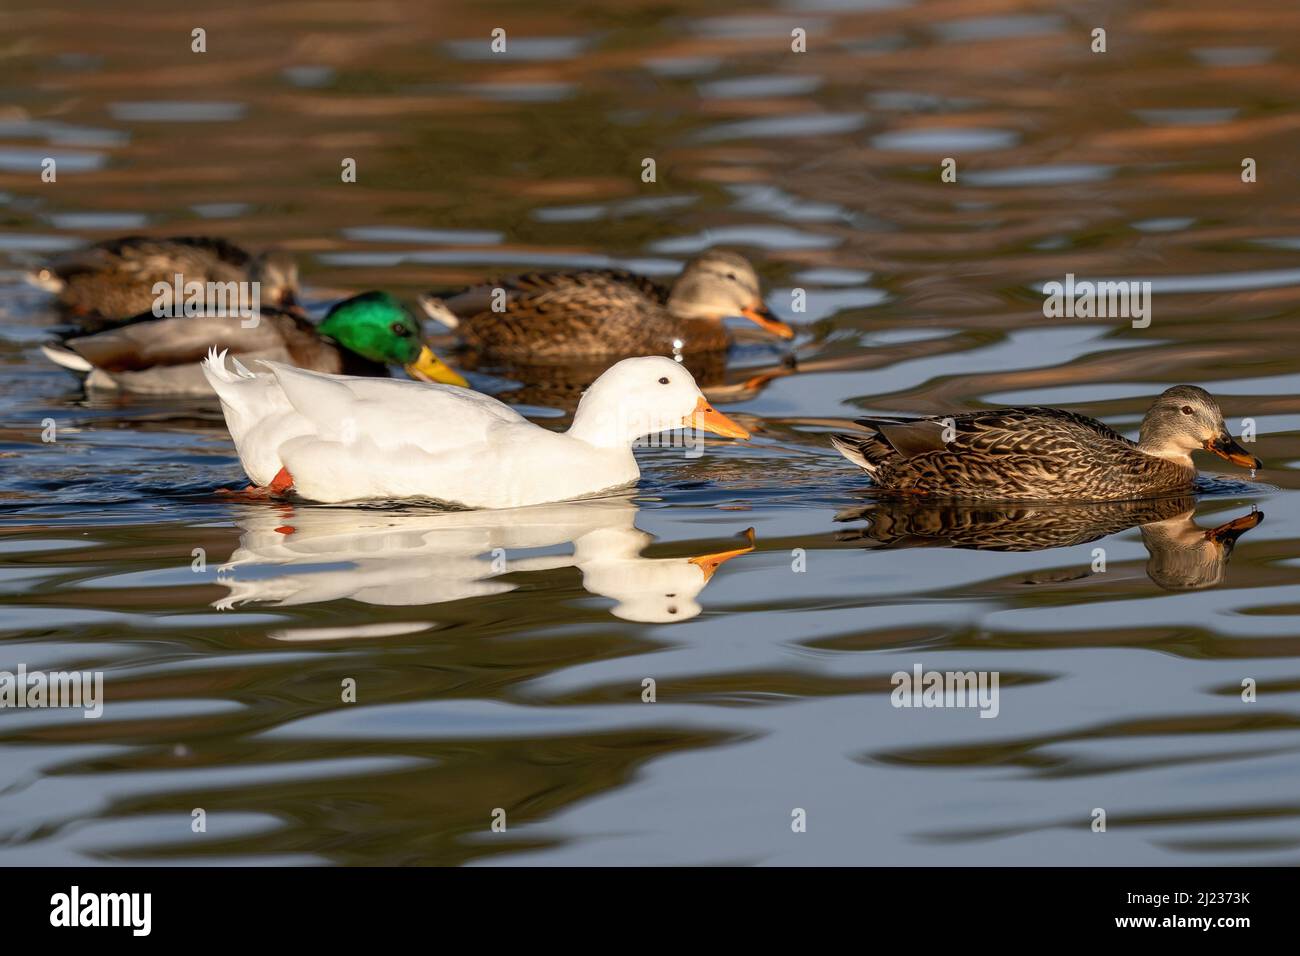 A Pekin duck swimming with a group of Mallard ducks in a pond. Stock Photo